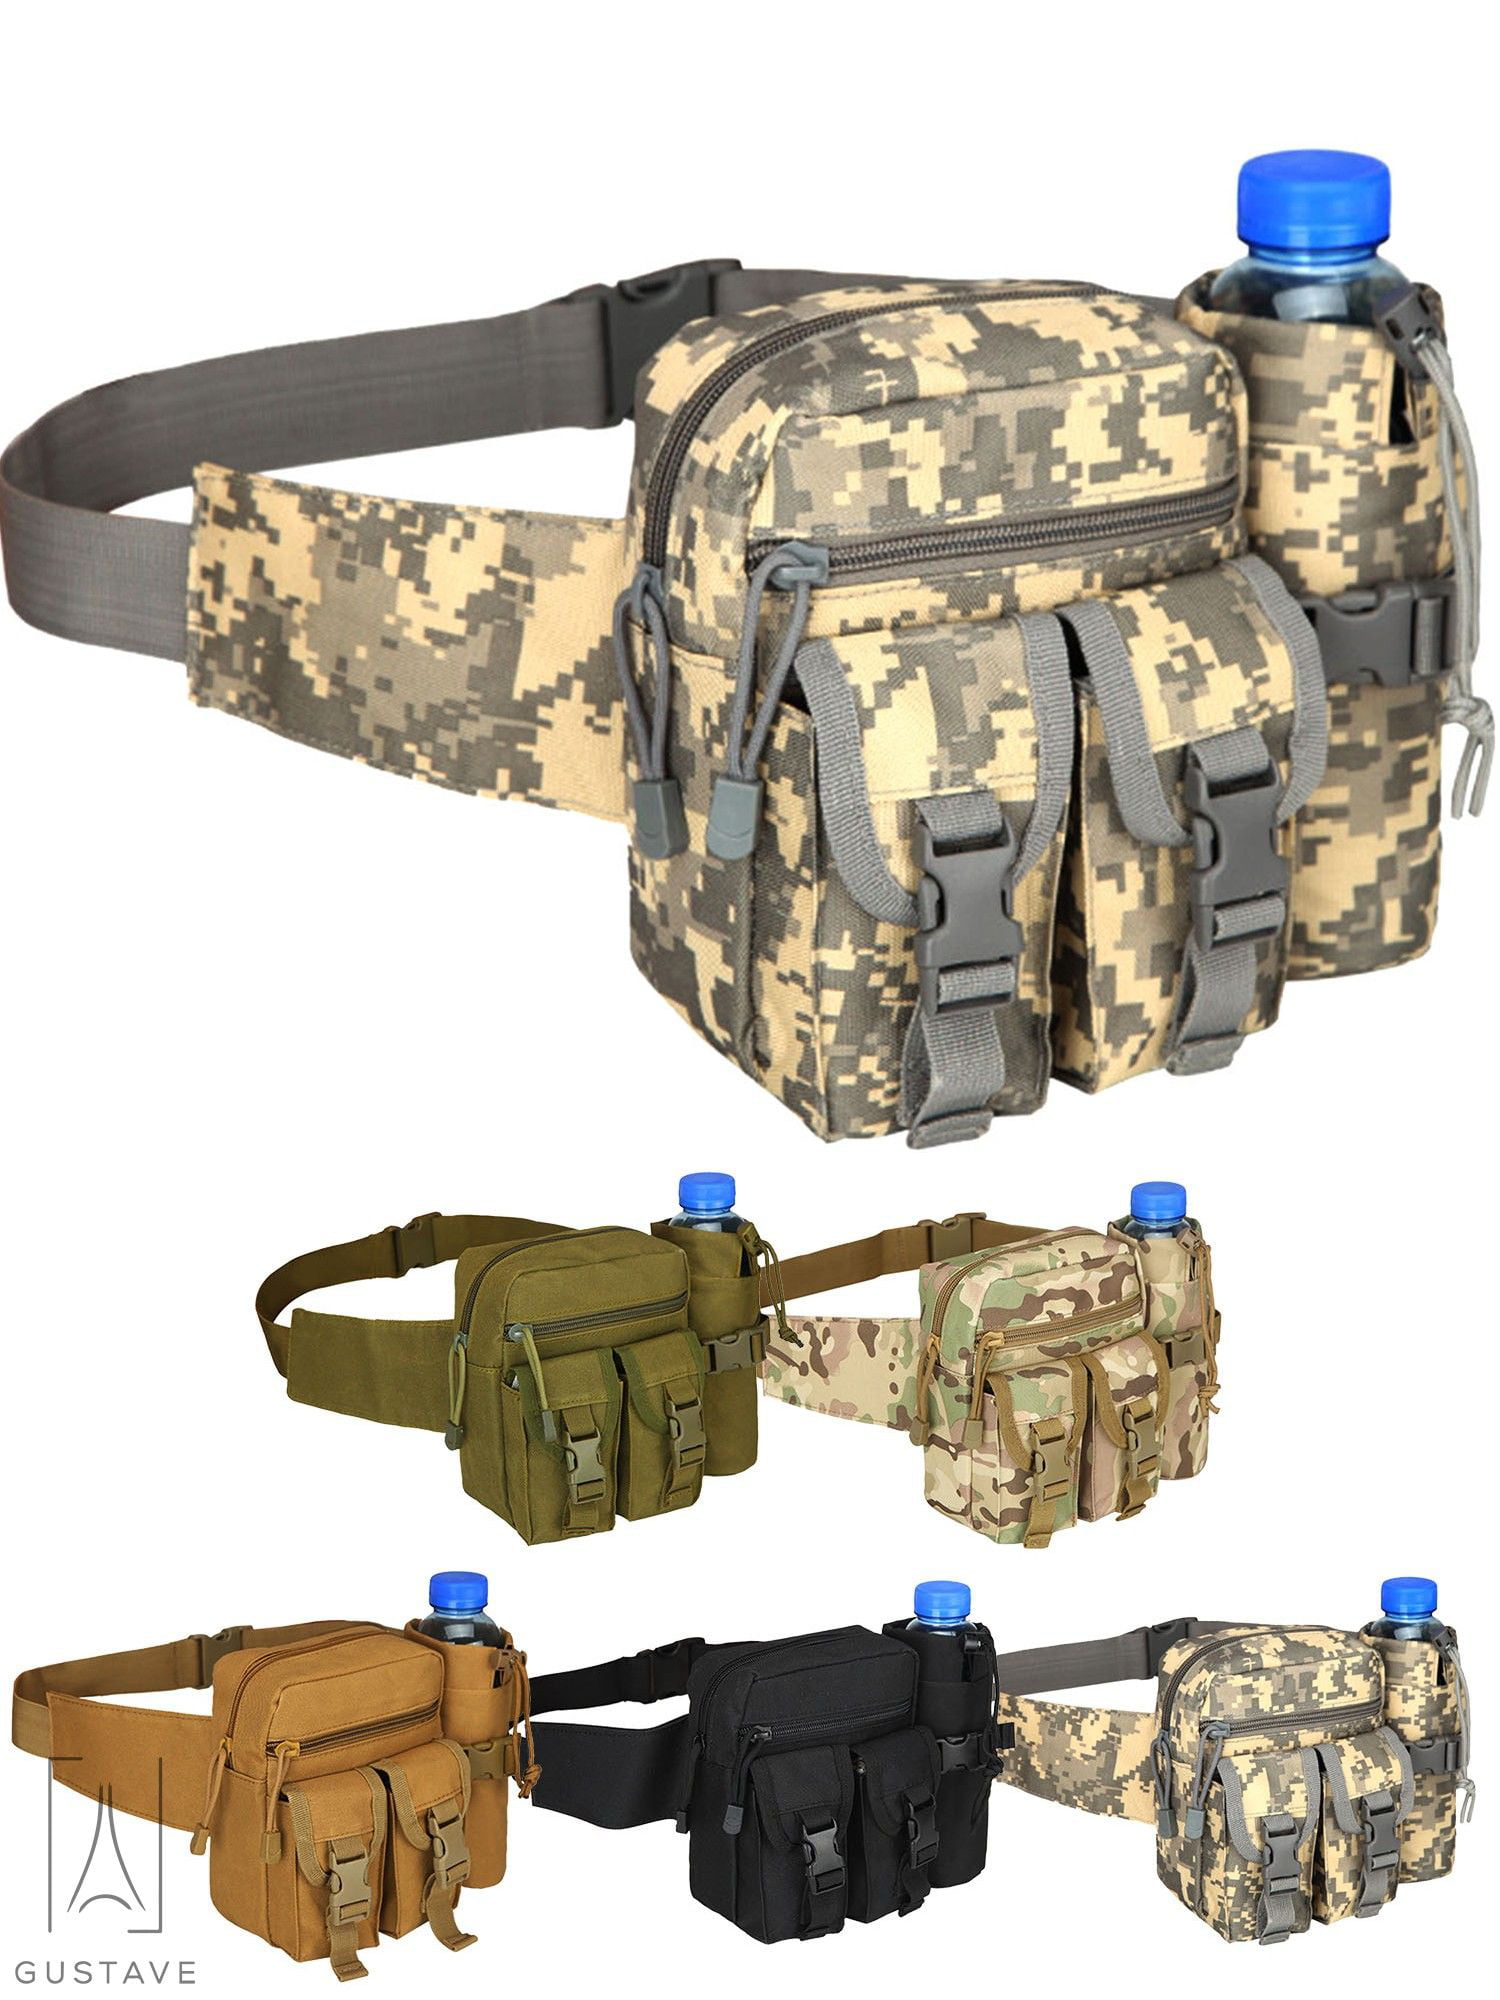 Water Bottle Pocket Cycling Zipper Storage Bag Adjustable Belt Camping and Cycling Leg Hanger Personal Wallet Suitable for Leisure Tactical Camouflage Leg Bag Hiking Running